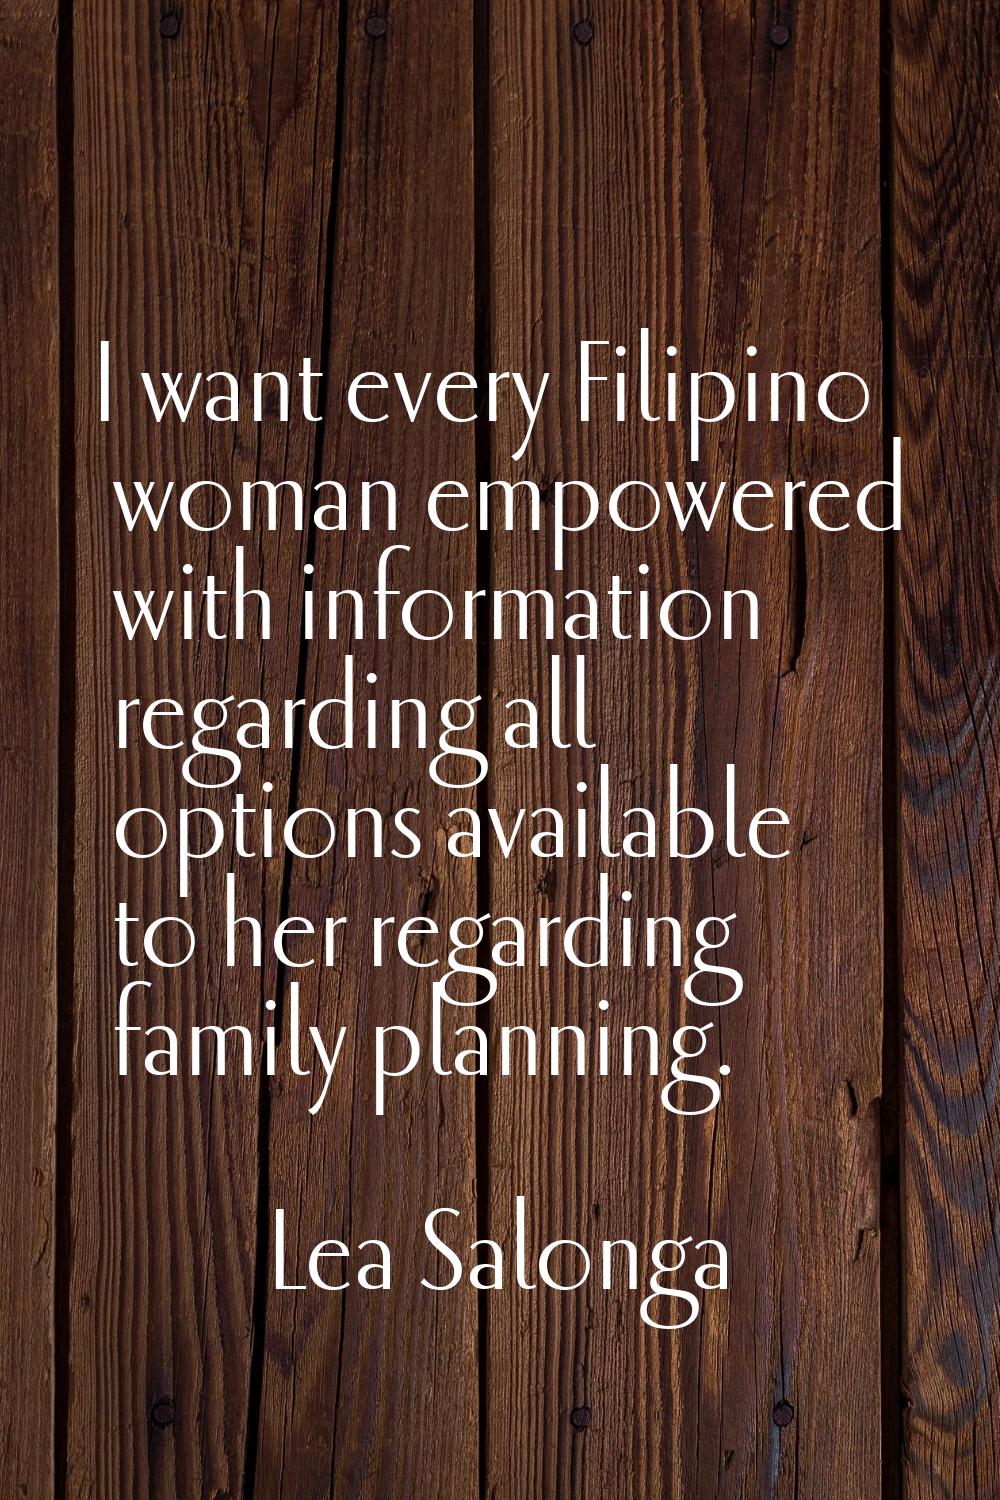 I want every Filipino woman empowered with information regarding all options available to her regar